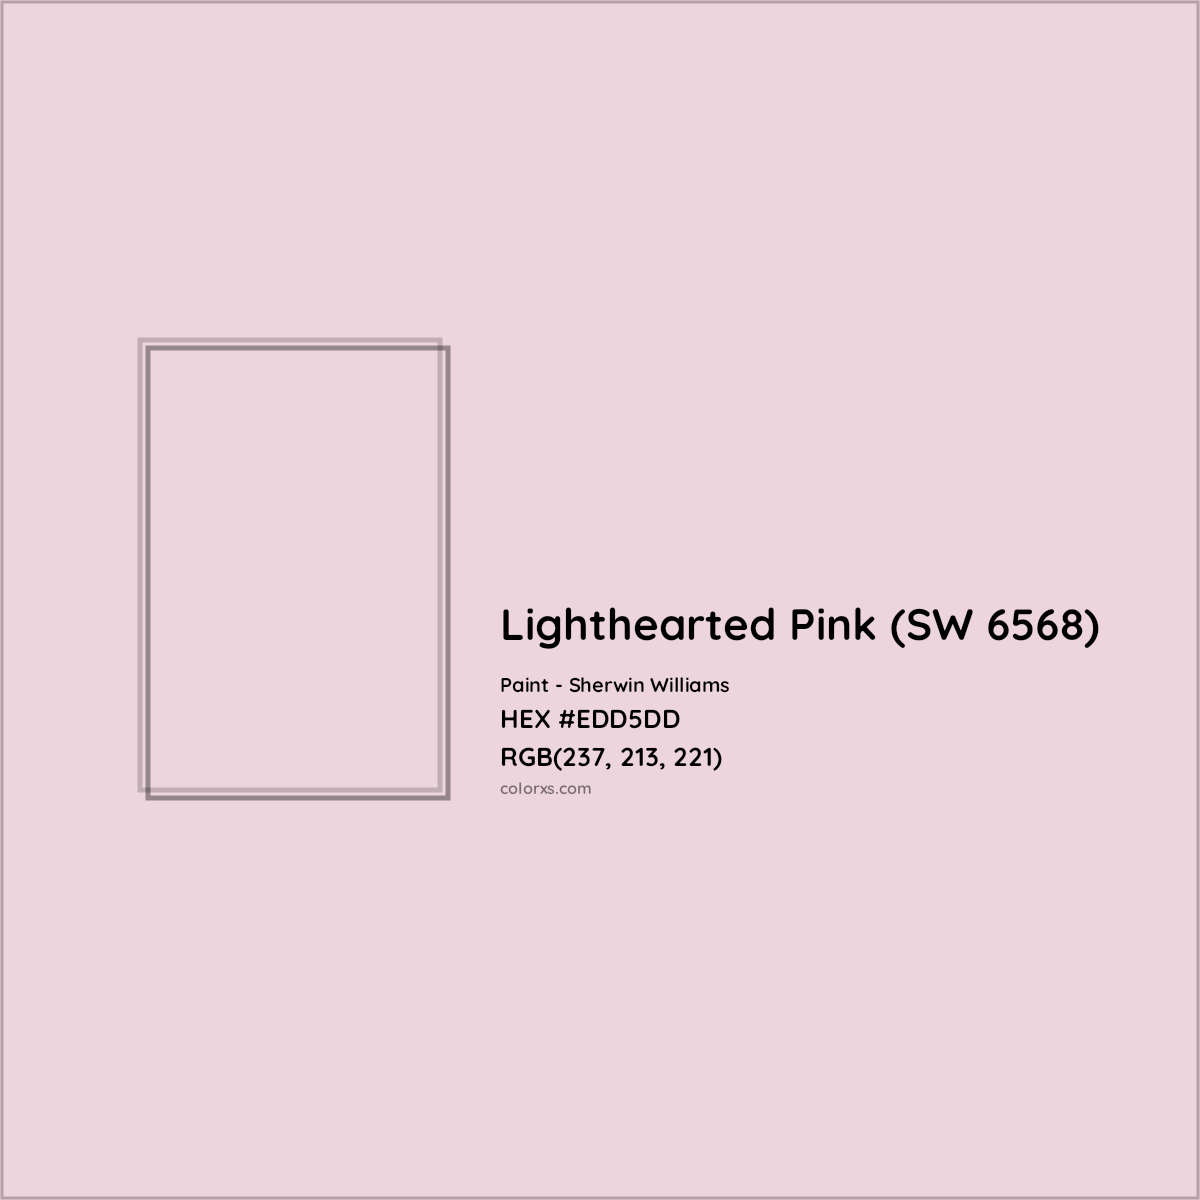 HEX #EDD5DD Lighthearted Pink (SW 6568) Paint Sherwin Williams - Color Code